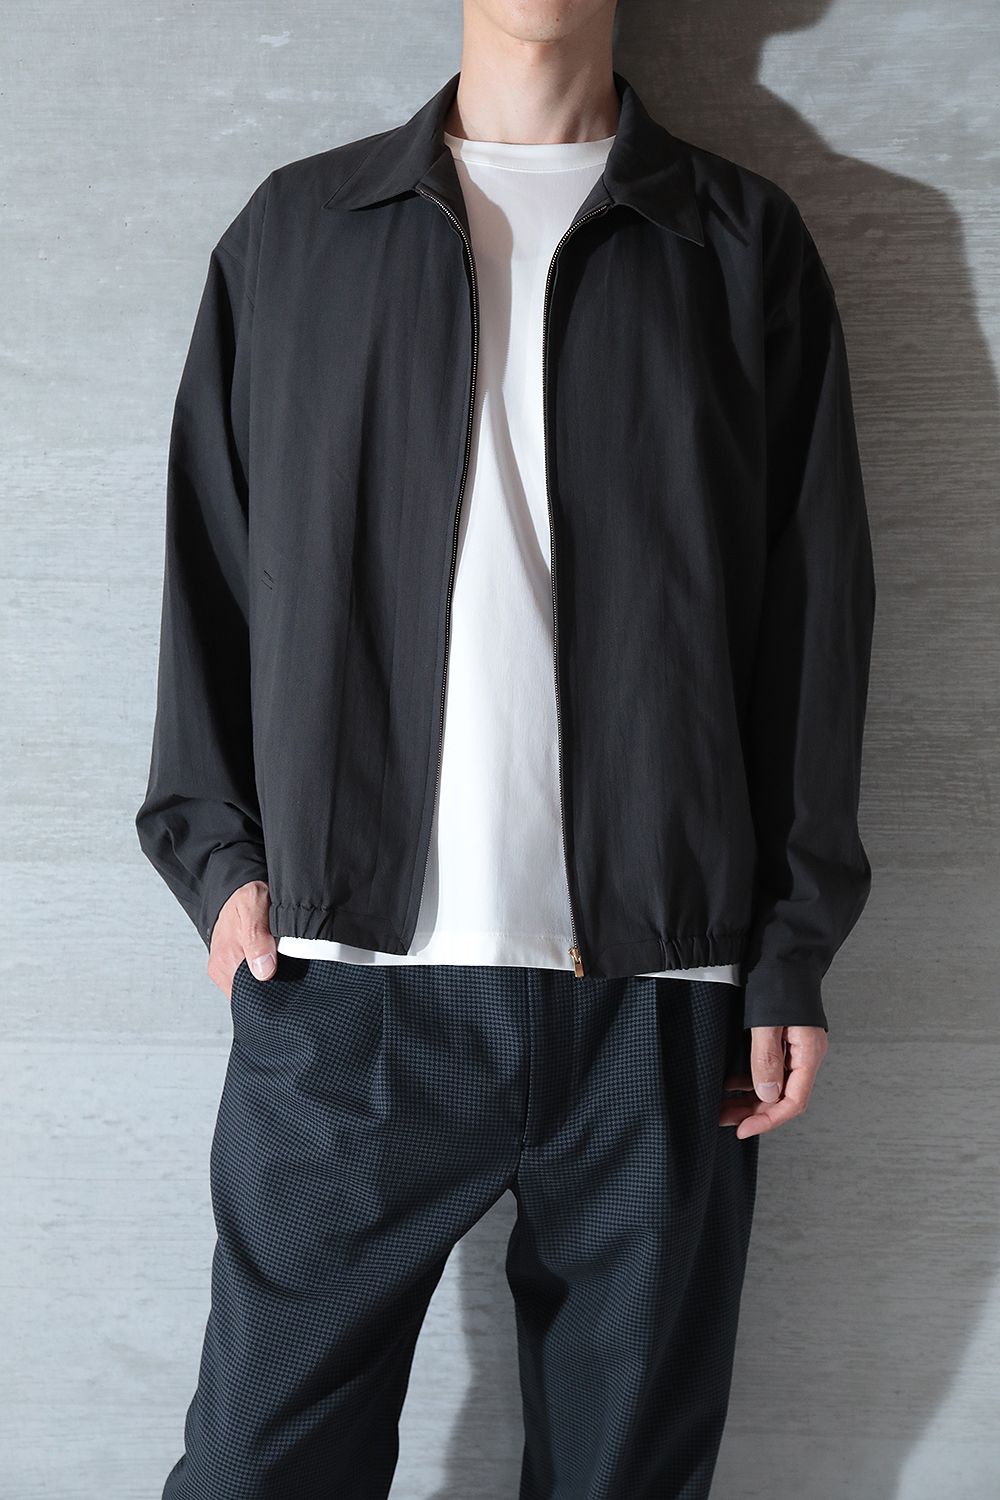 VAINL ARCHIVE】22SS NEW ITEM & STYLING | Acacia ONLINESTORE